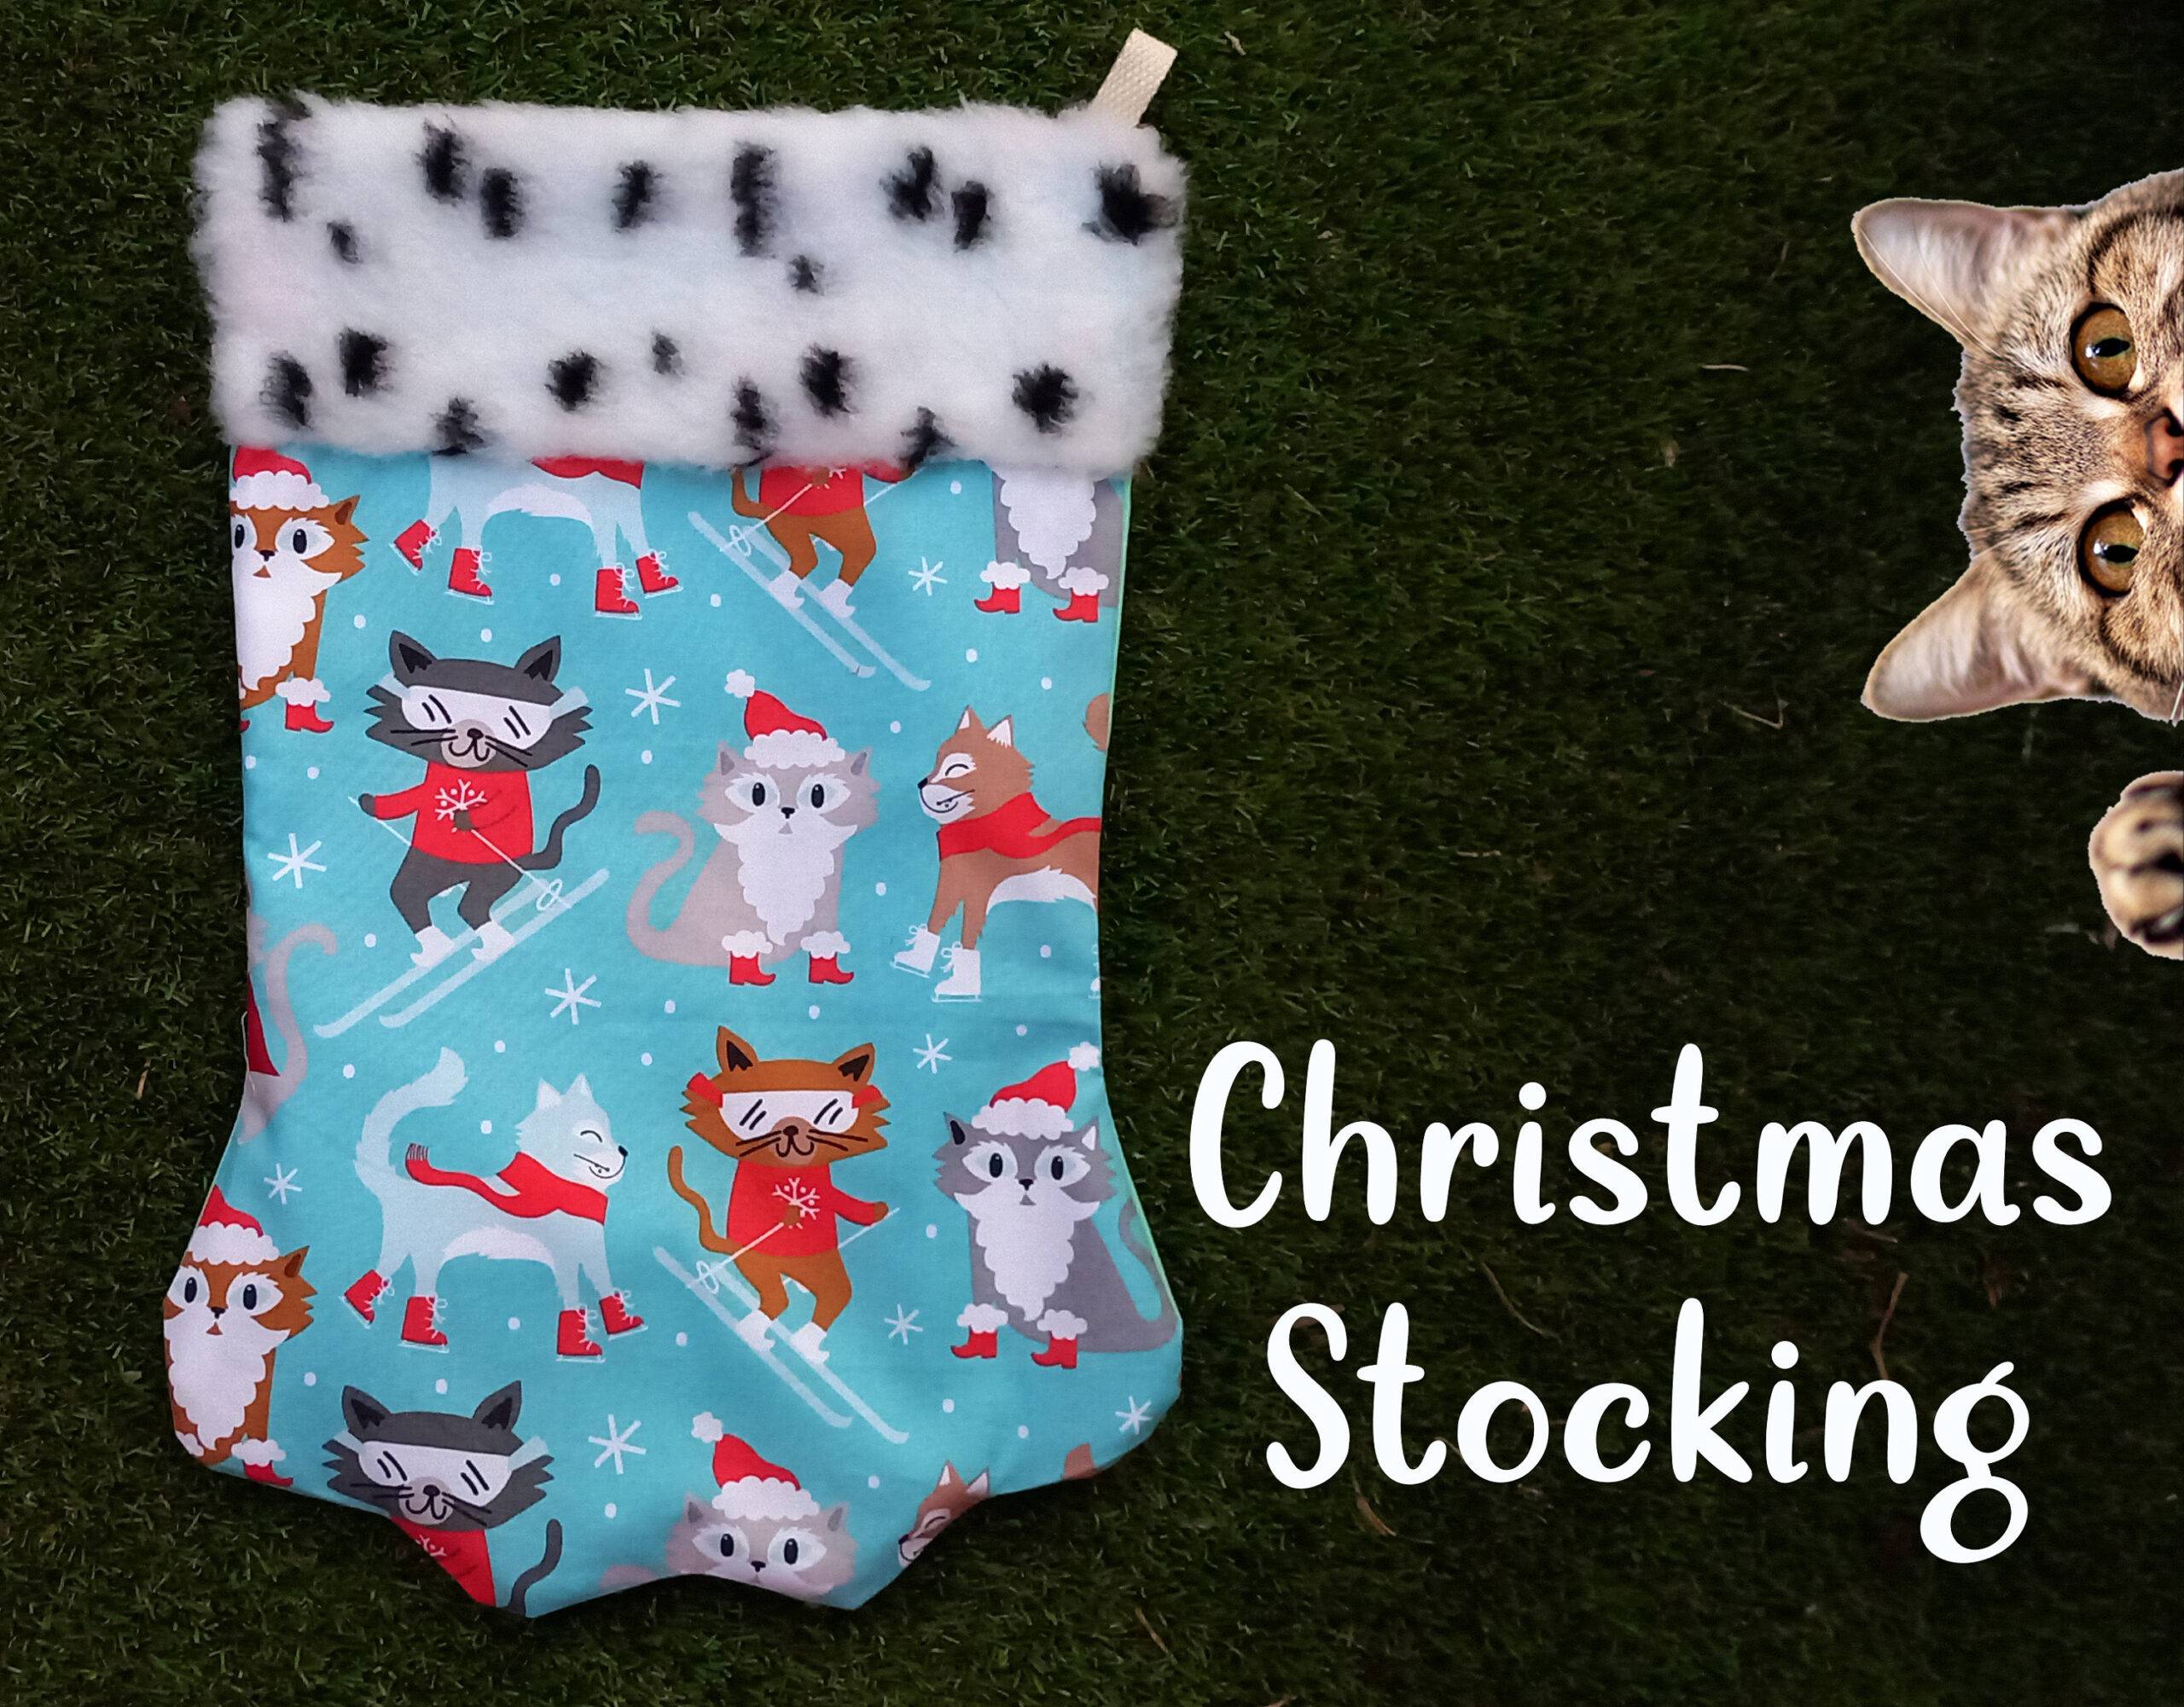 Treat your furry companion to their own special stocking this Christmas